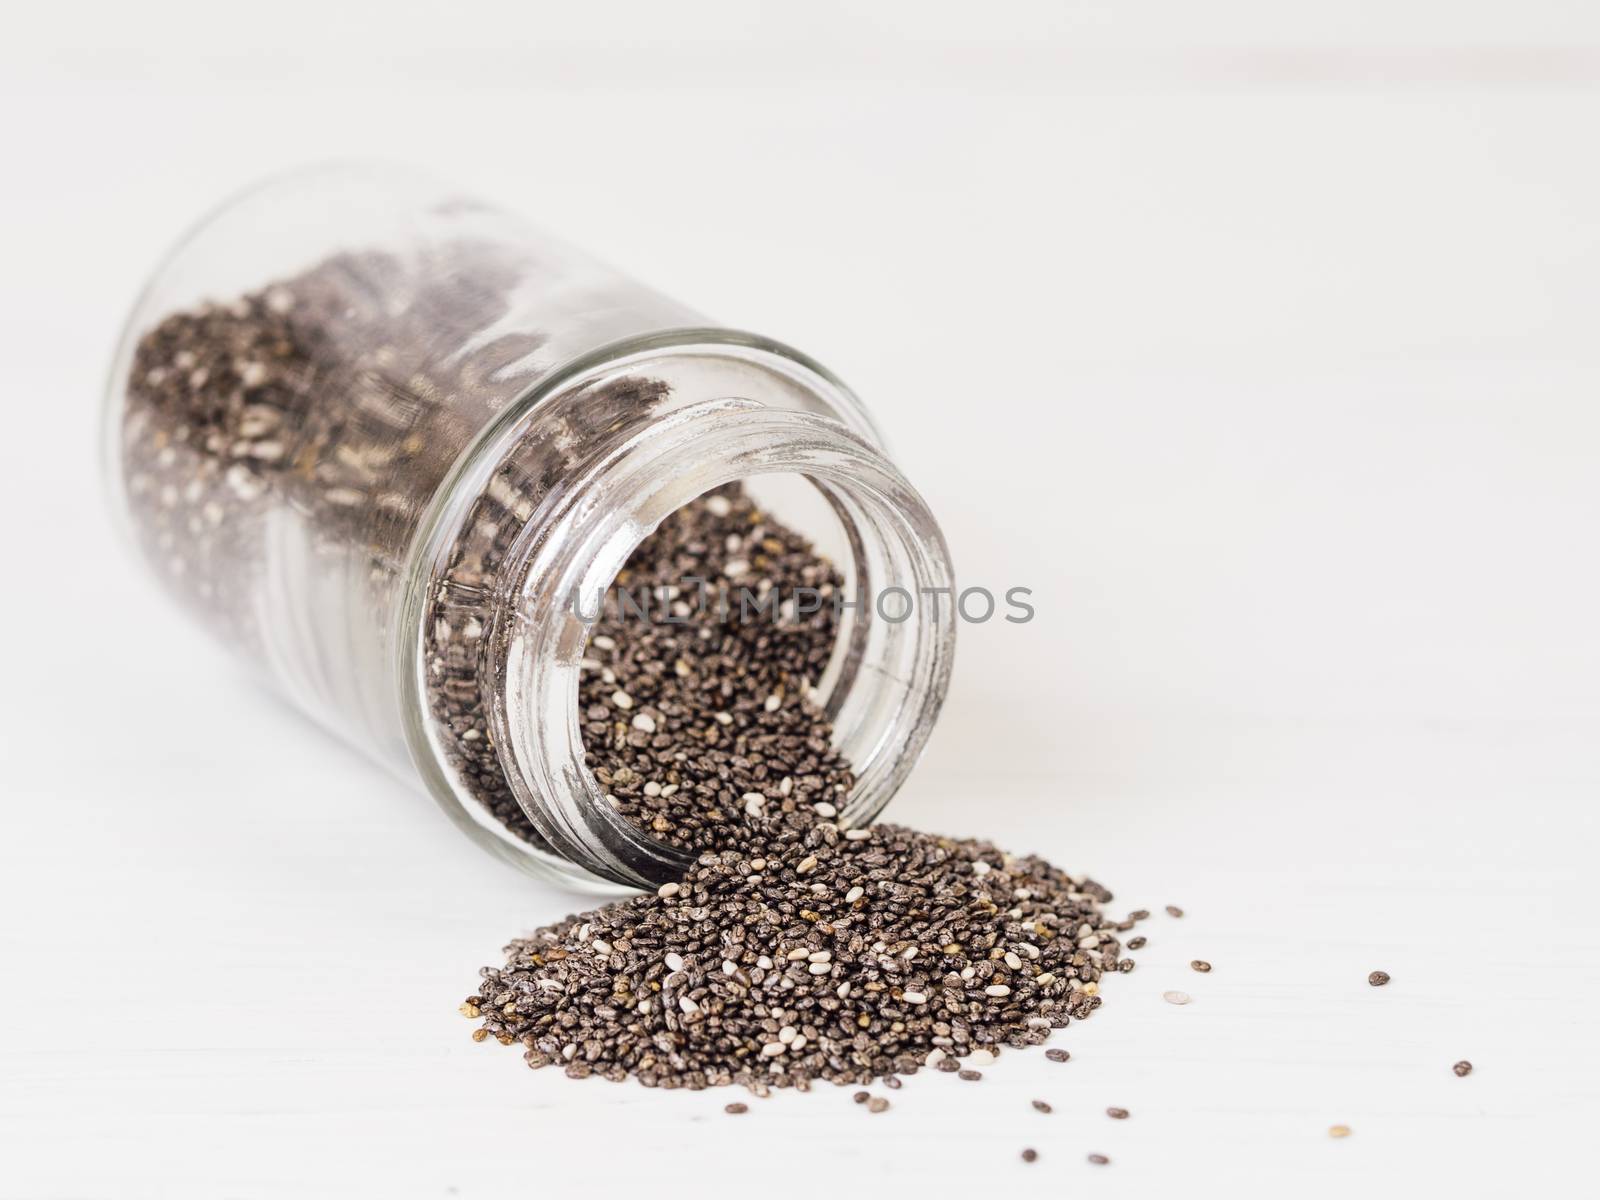 chia seeds scattered from glass jar on white background. Copy space.